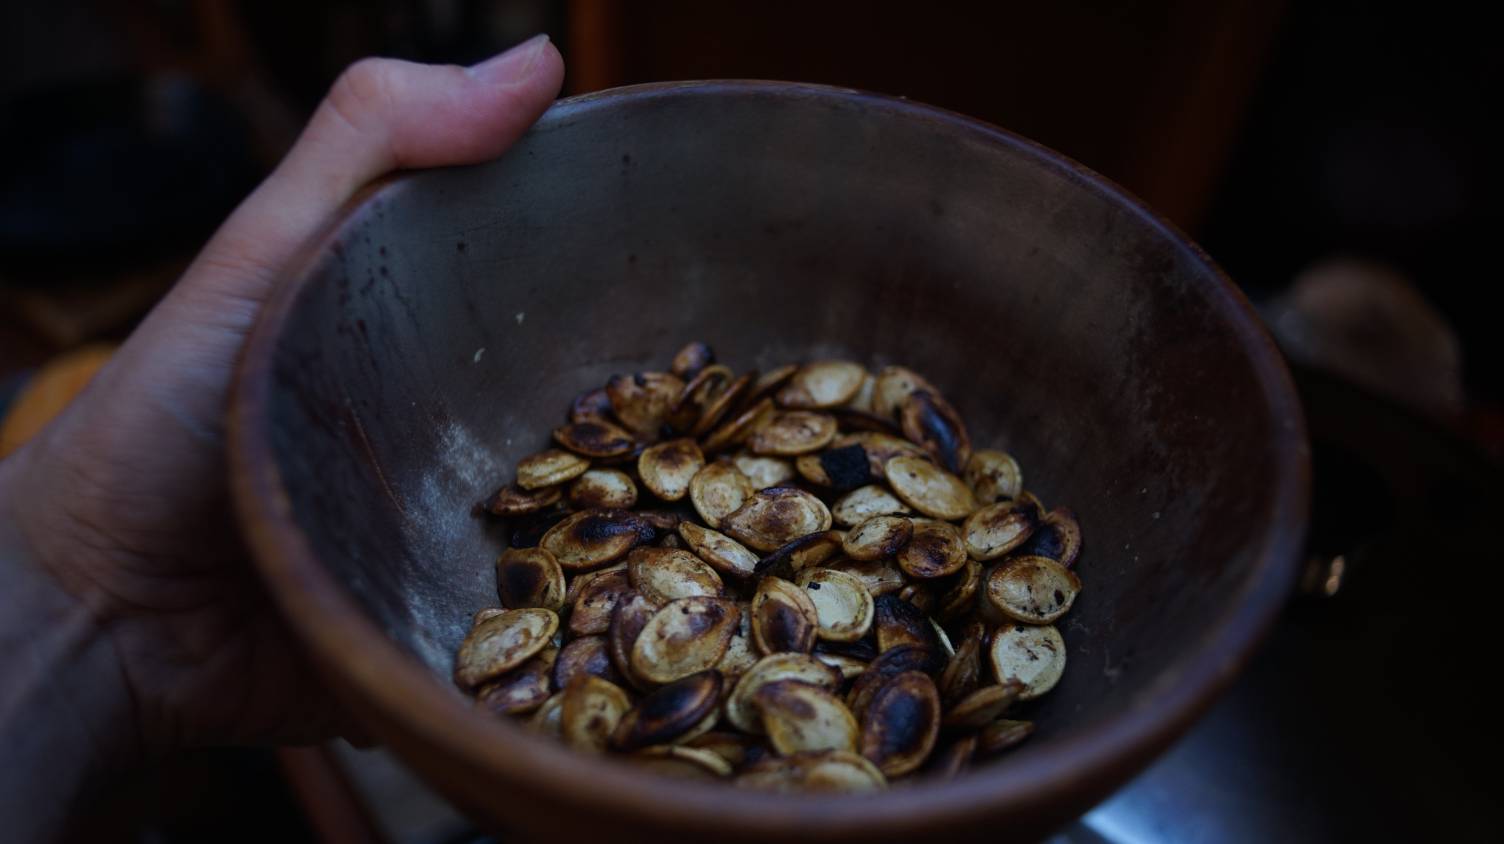 A photo of a hand holding a bowl of roasted pumpkin seeds